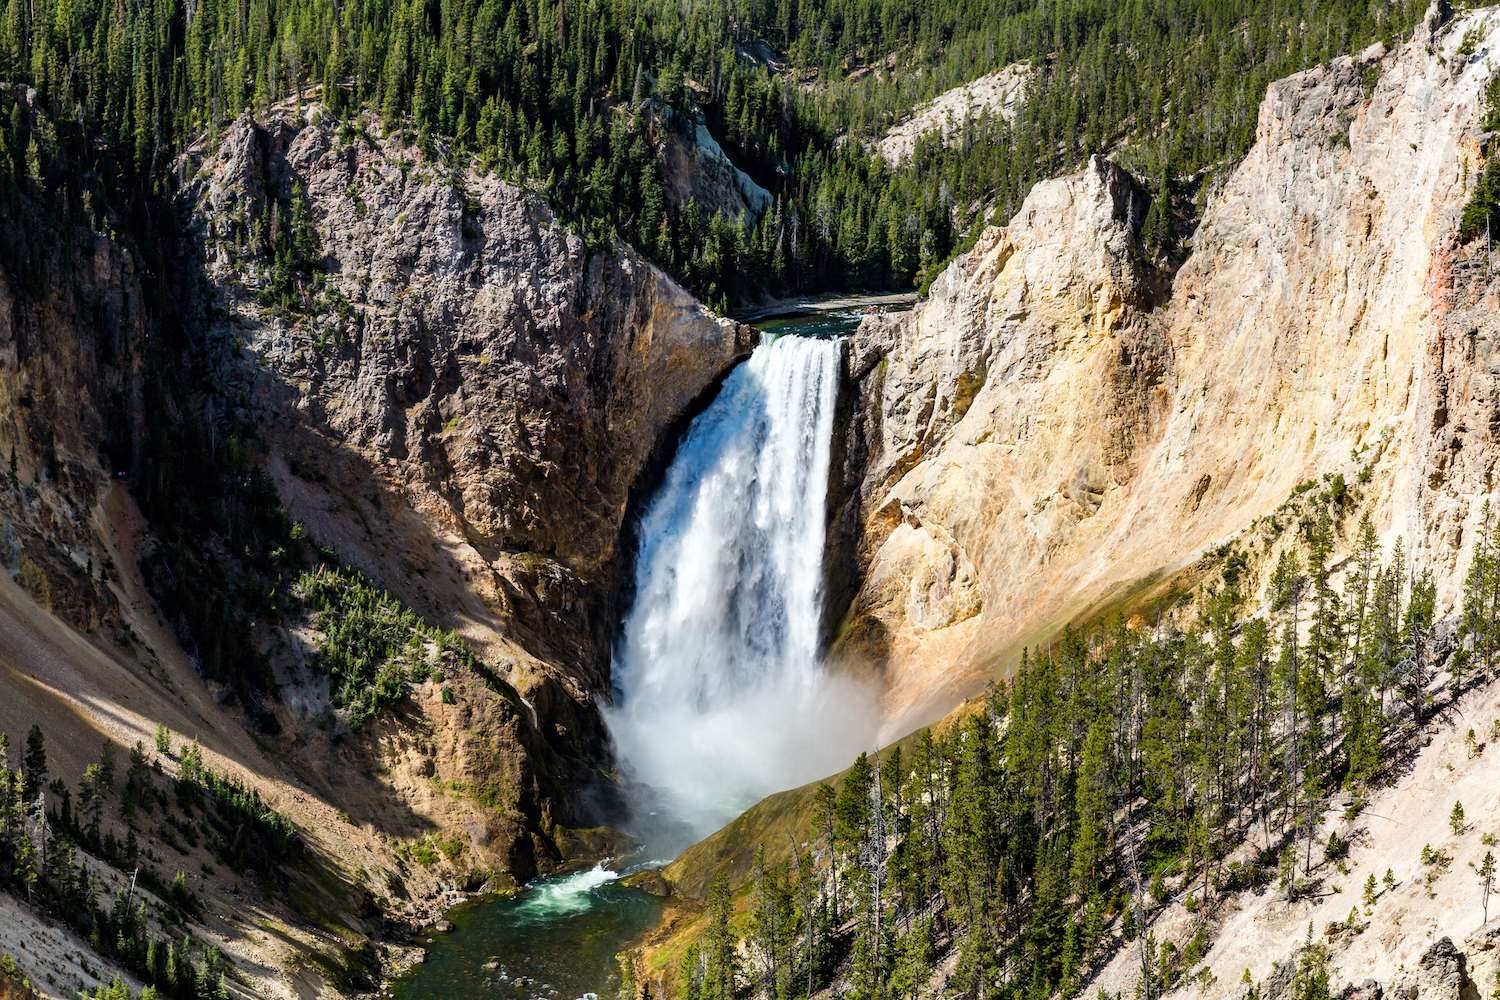 Lower Yellowstone Falls in the Yellowstone National Park, USA